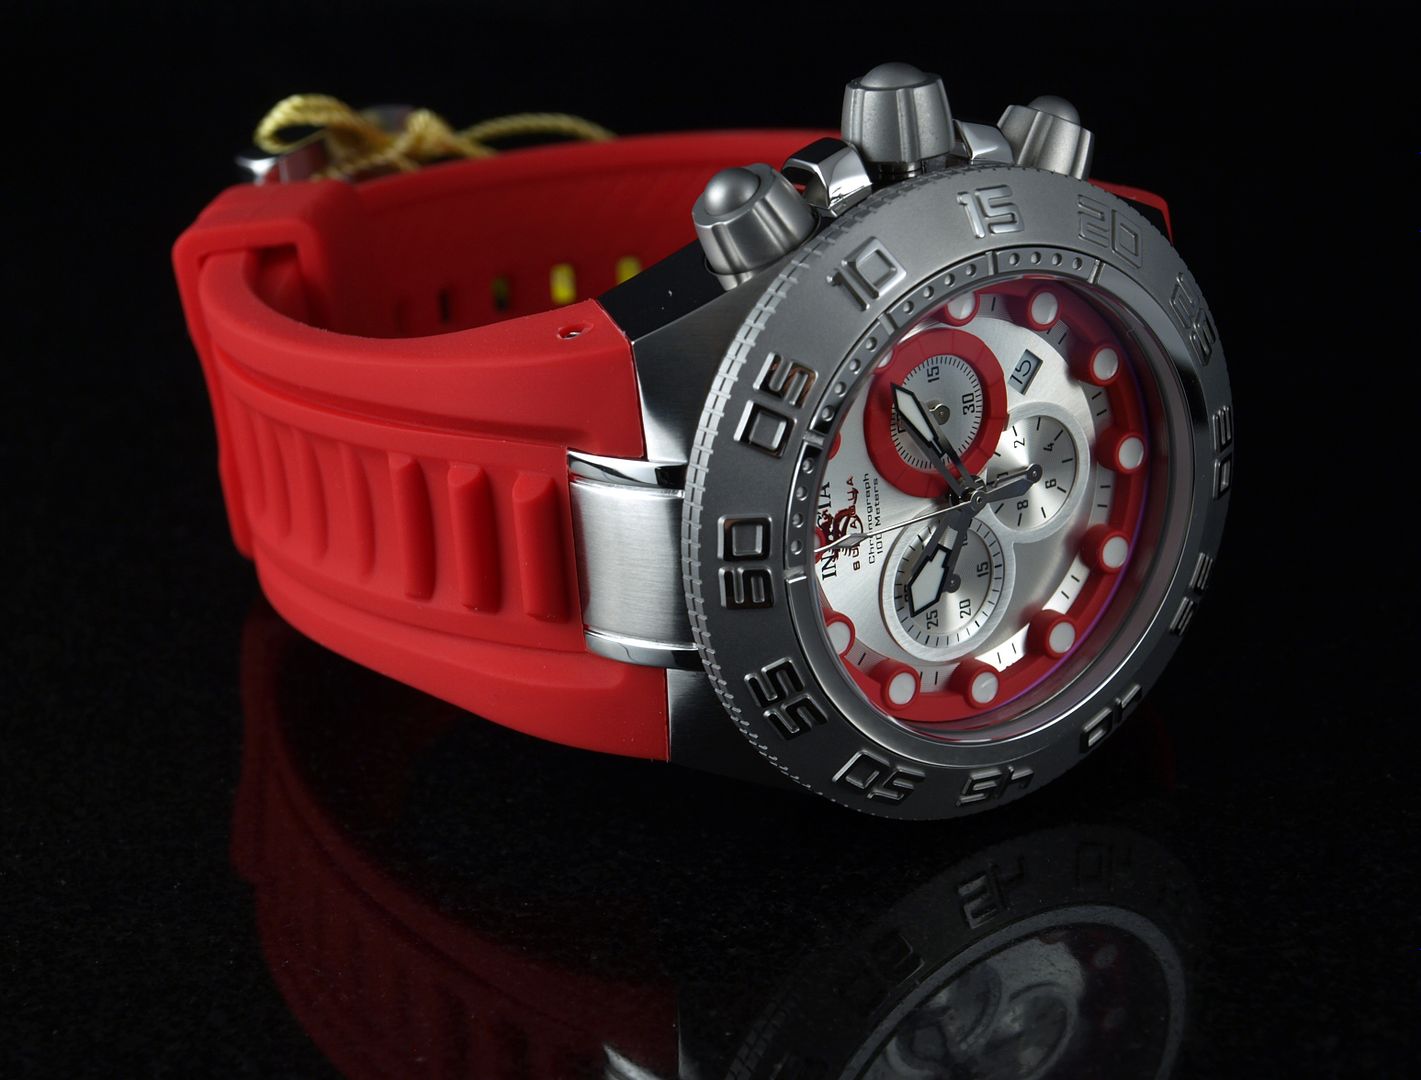 An Incredibly Soft Red Polyurethane Band makes this watch one of the 